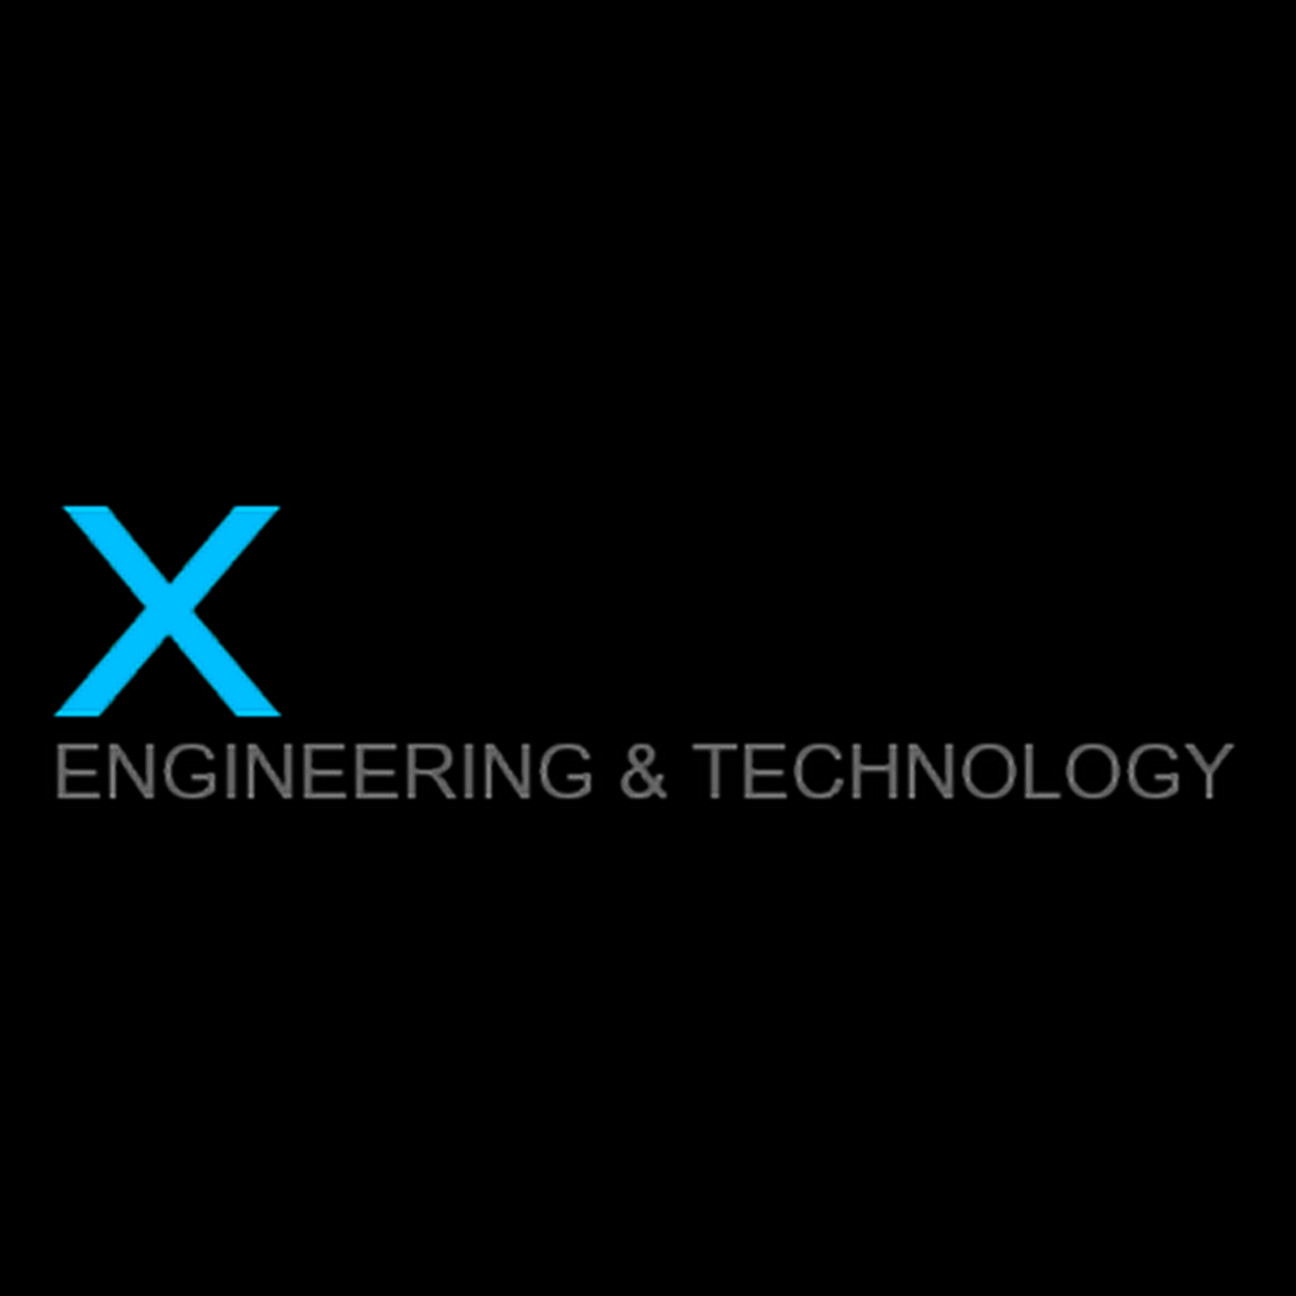 Xware Engineering And Technology.v1